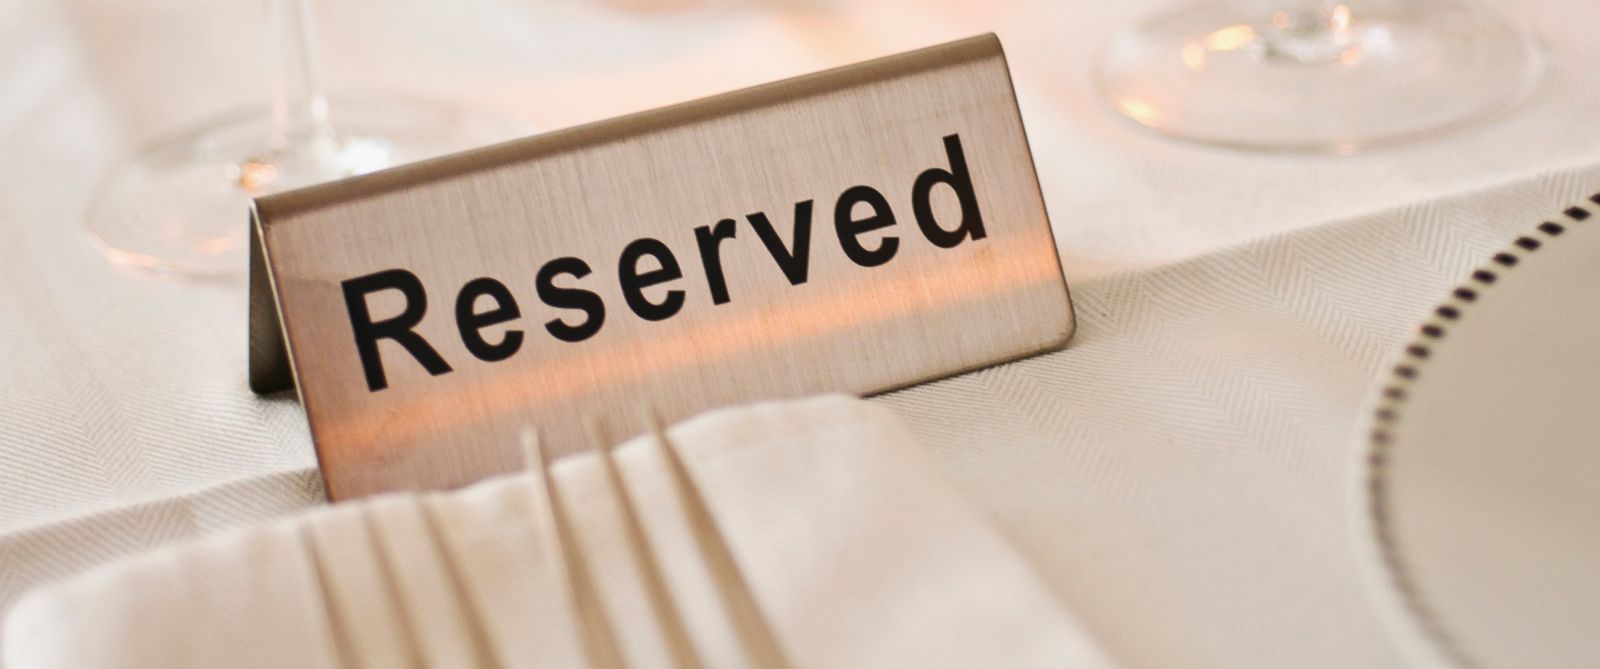 GTY_Reserved_Table_TG_140610_12x5_1600